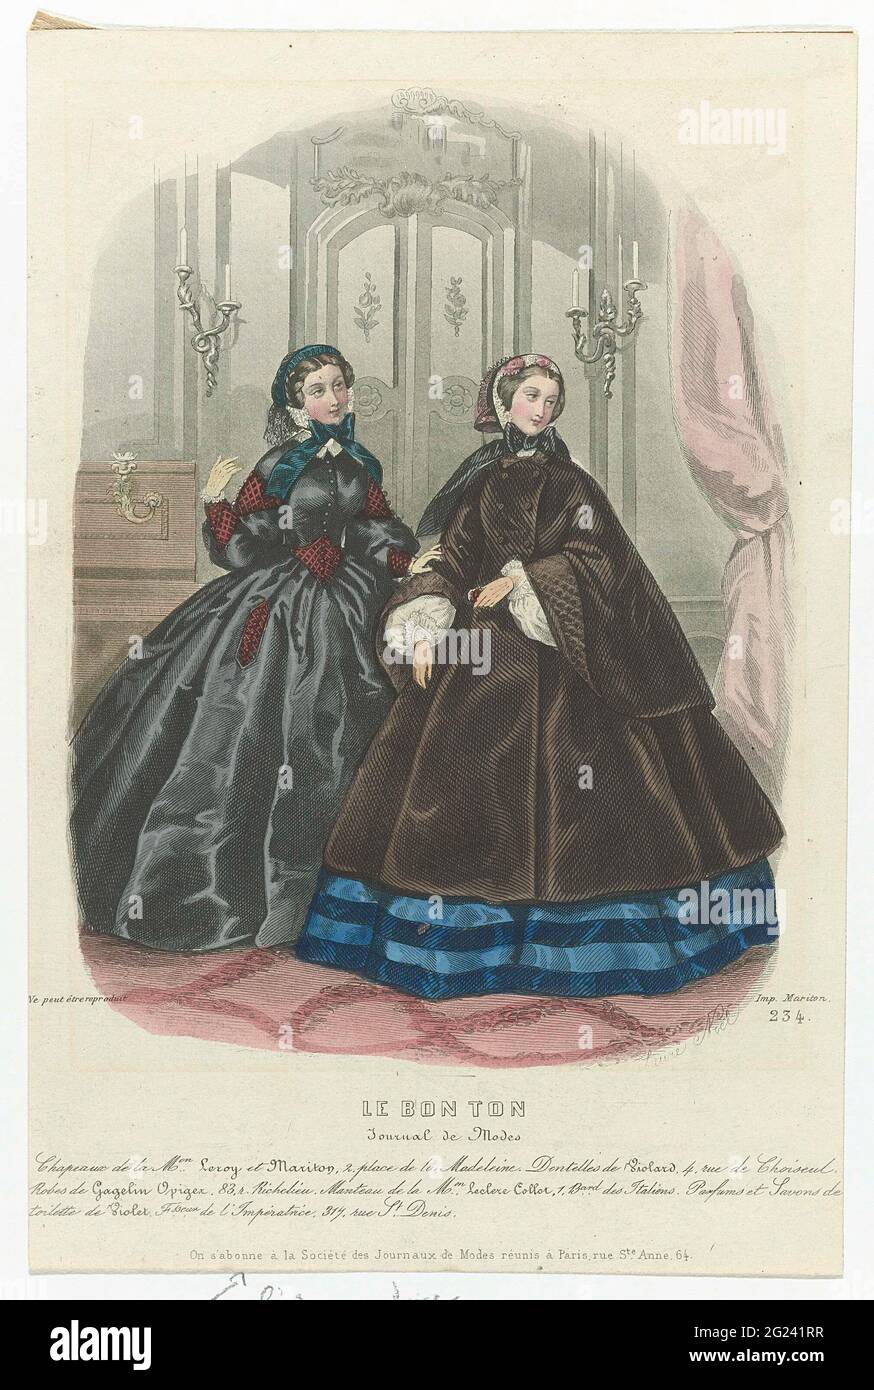 Le Bon Ton, Journal De Modes, 1860, No. 234: Chapeaux de la M.ON LEROY  (...). Two women in an interior. According to the caption: hats from Leroy  and Mariton. Side of violard.